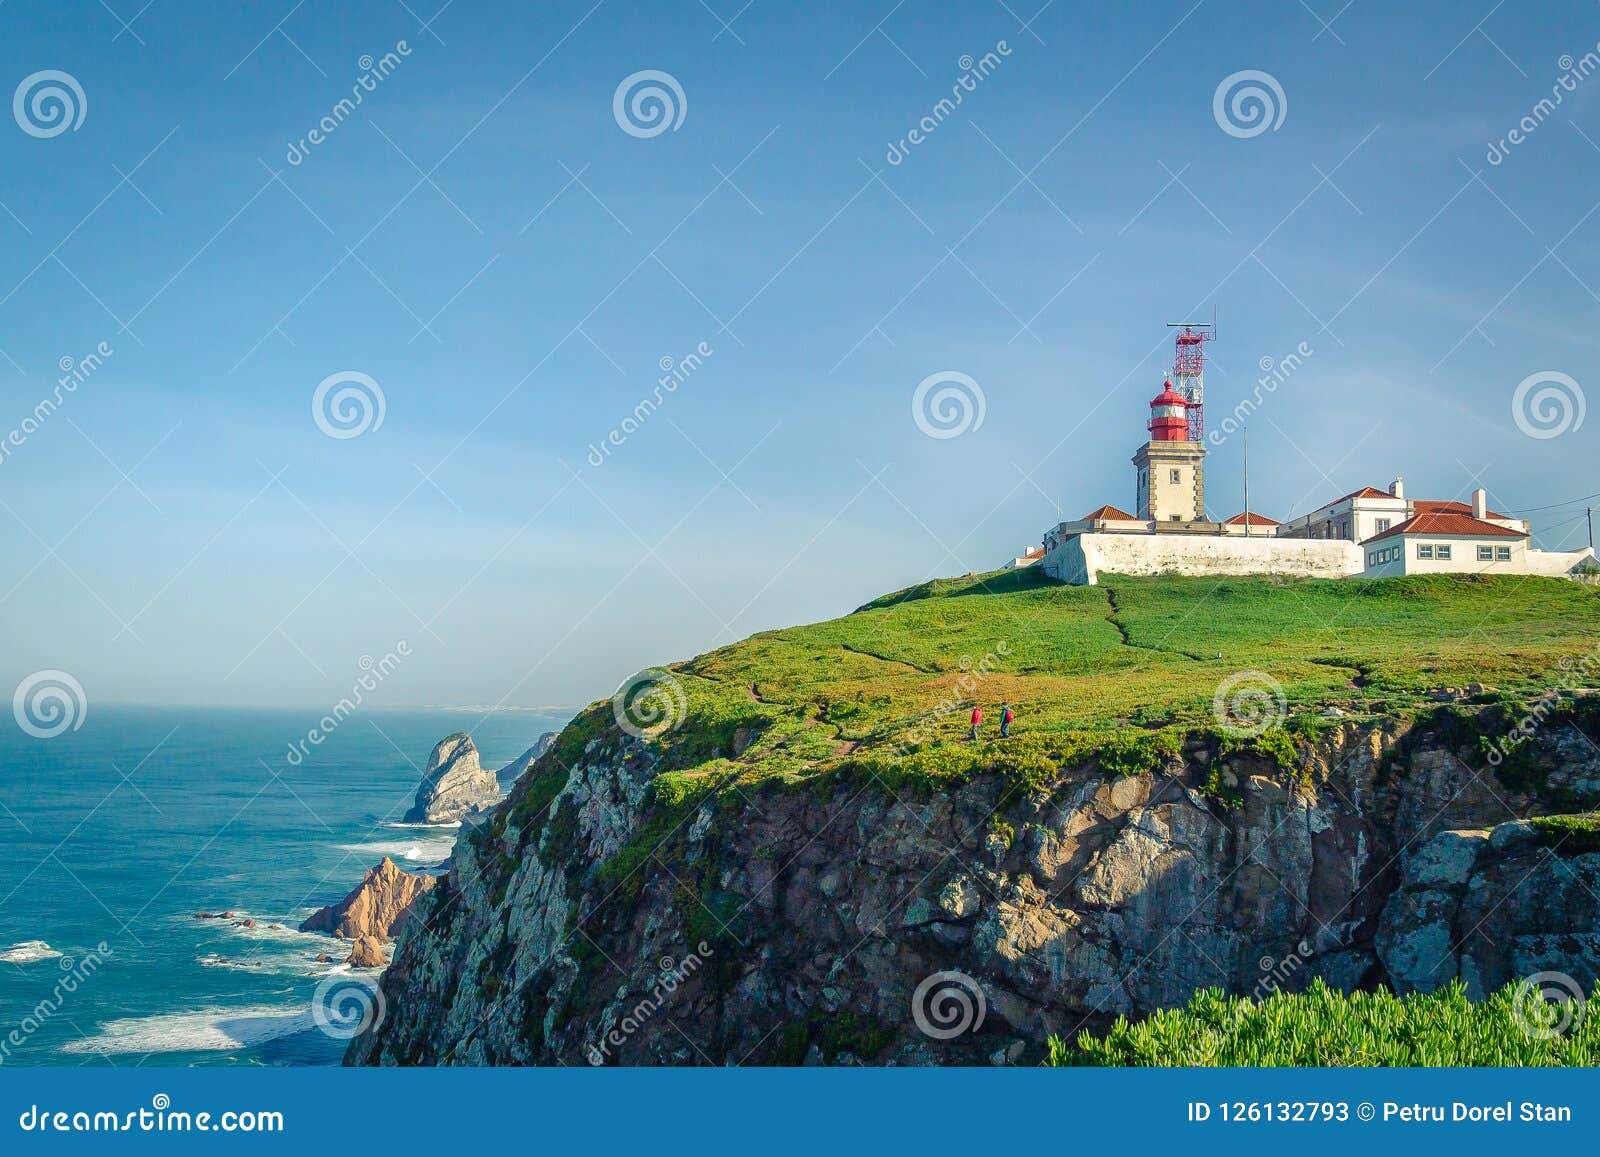 cabo da roca, portugal. lighthouse and cliffs over atlantic ocean, the most westerly point of the european mainland.